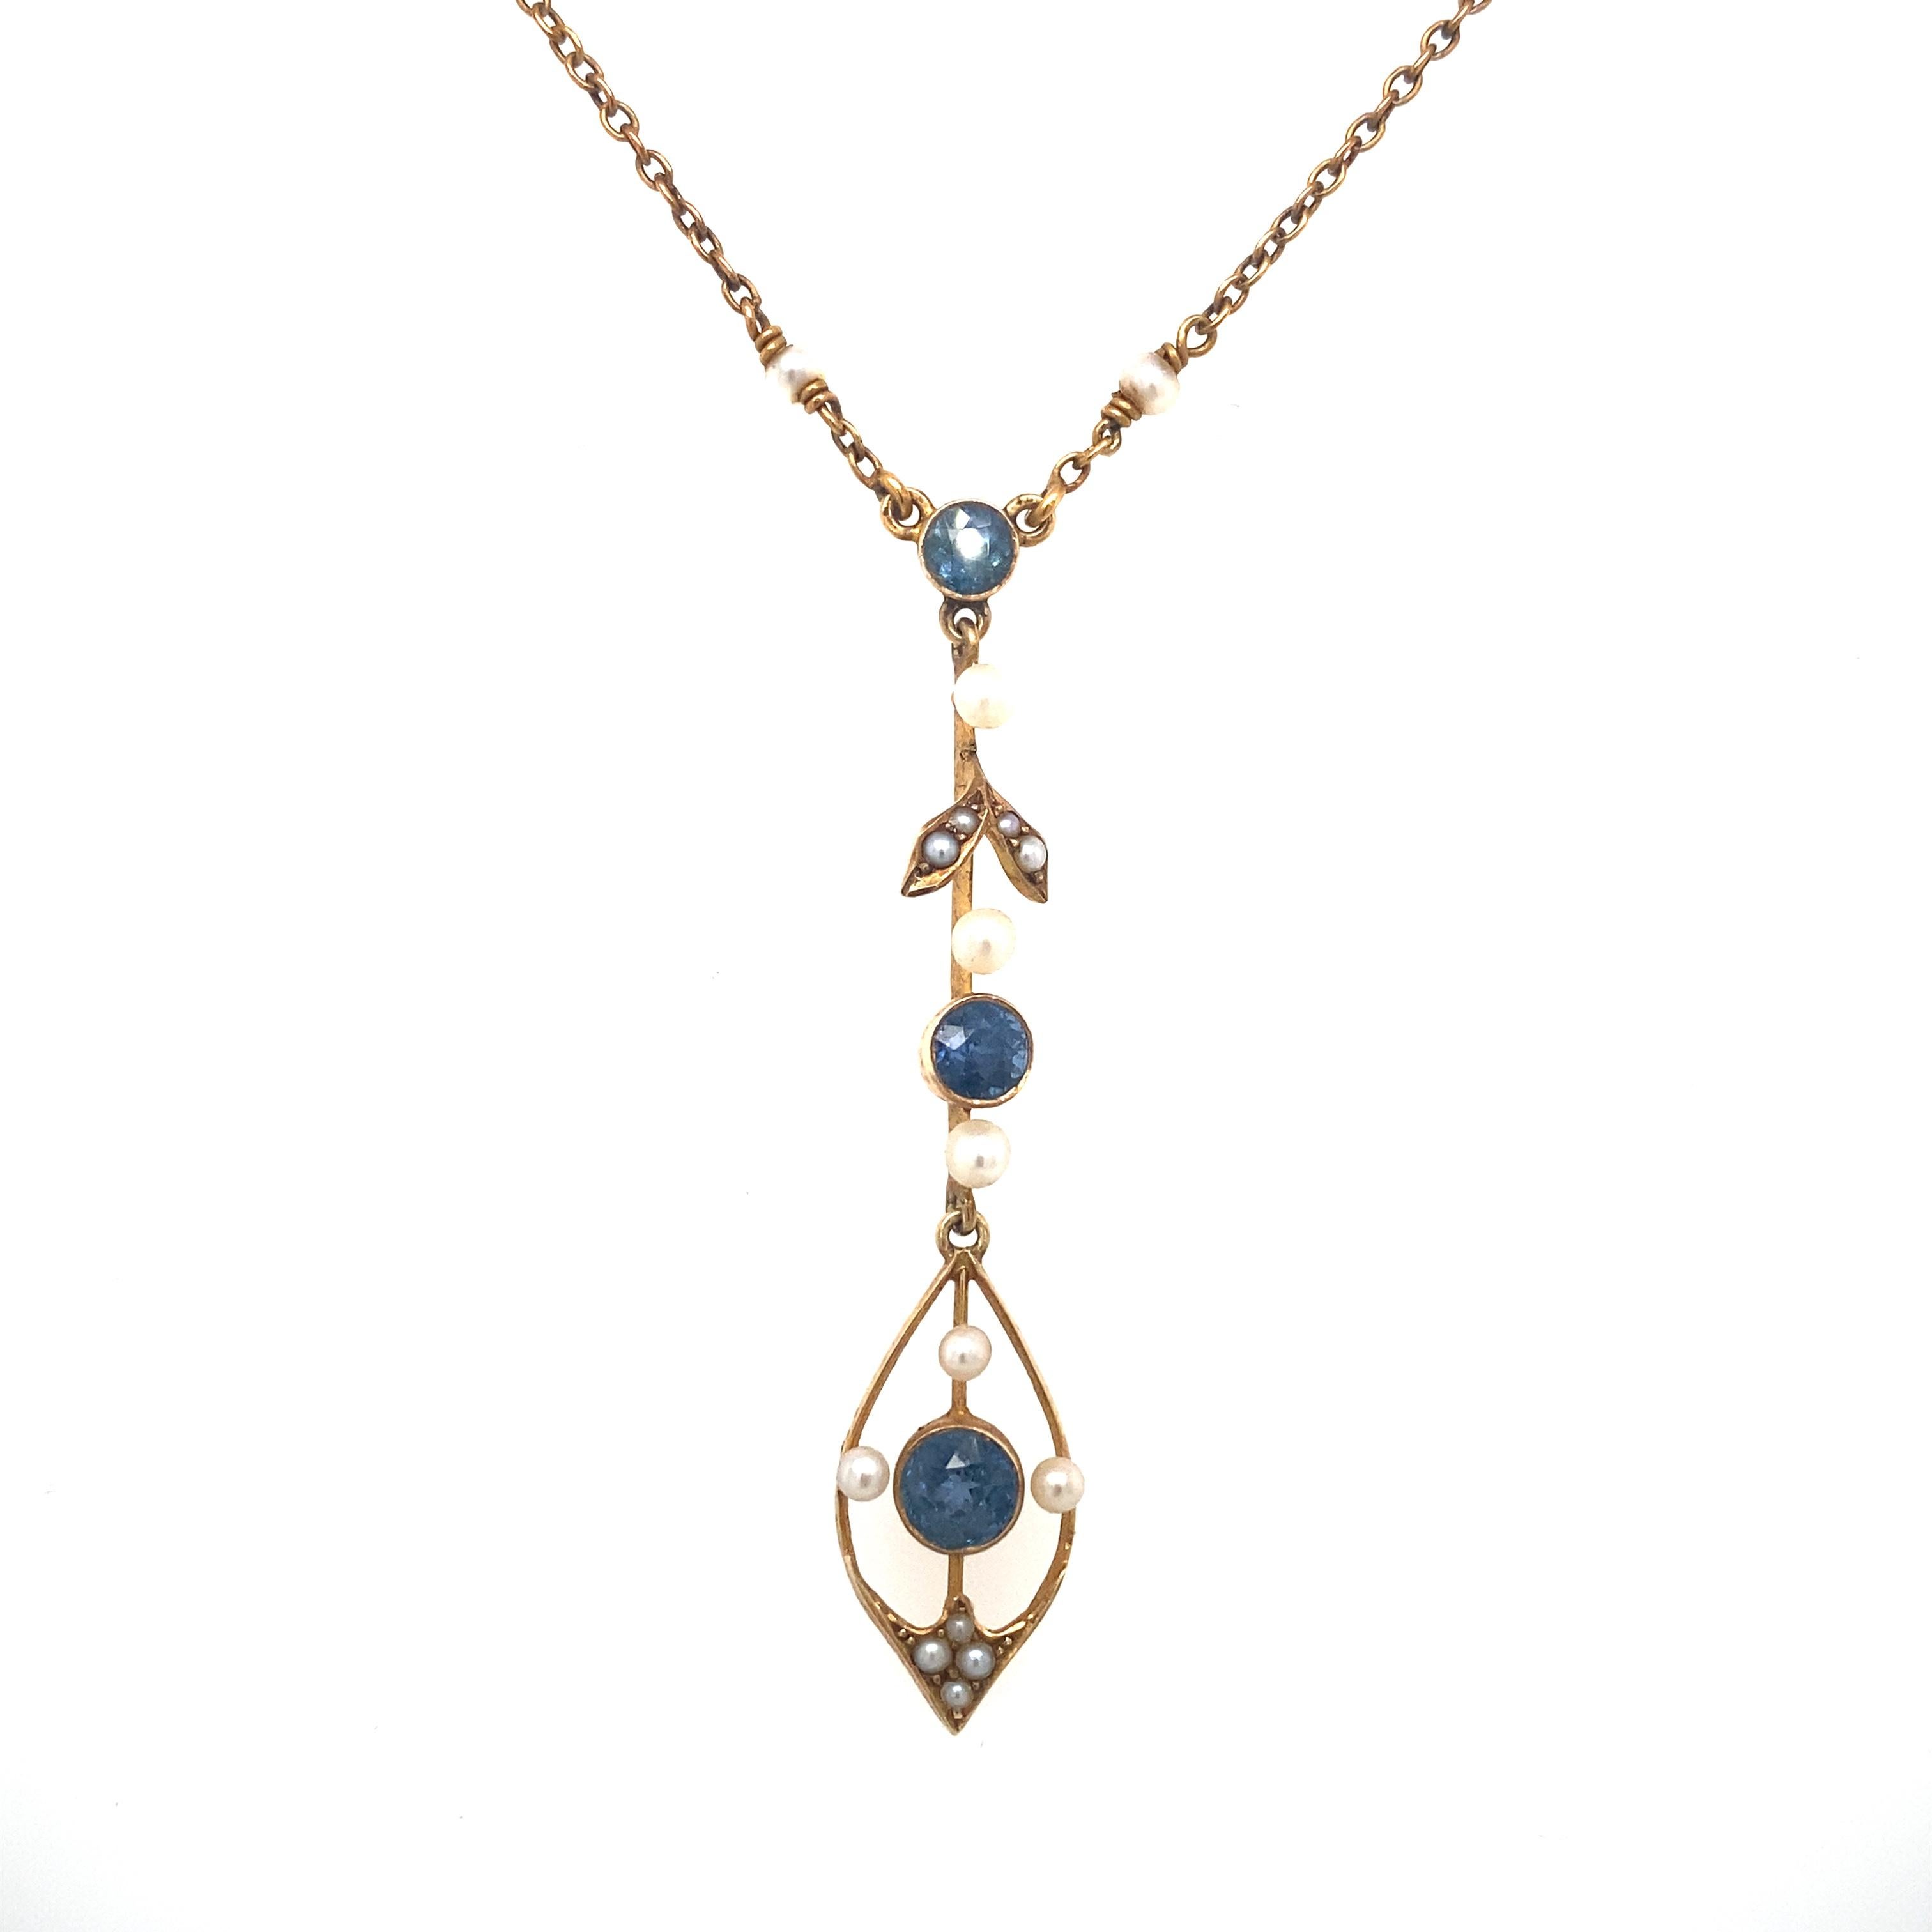 Item Details: This beautiful necklace features natural pearls and silky blue sapphires. All the stones are in great shape. This piece originates from England.

Circa: 1890s
Metal Type: 14 Karat Yellow gold
Weight: 3.3 grams
Size: 15 inch